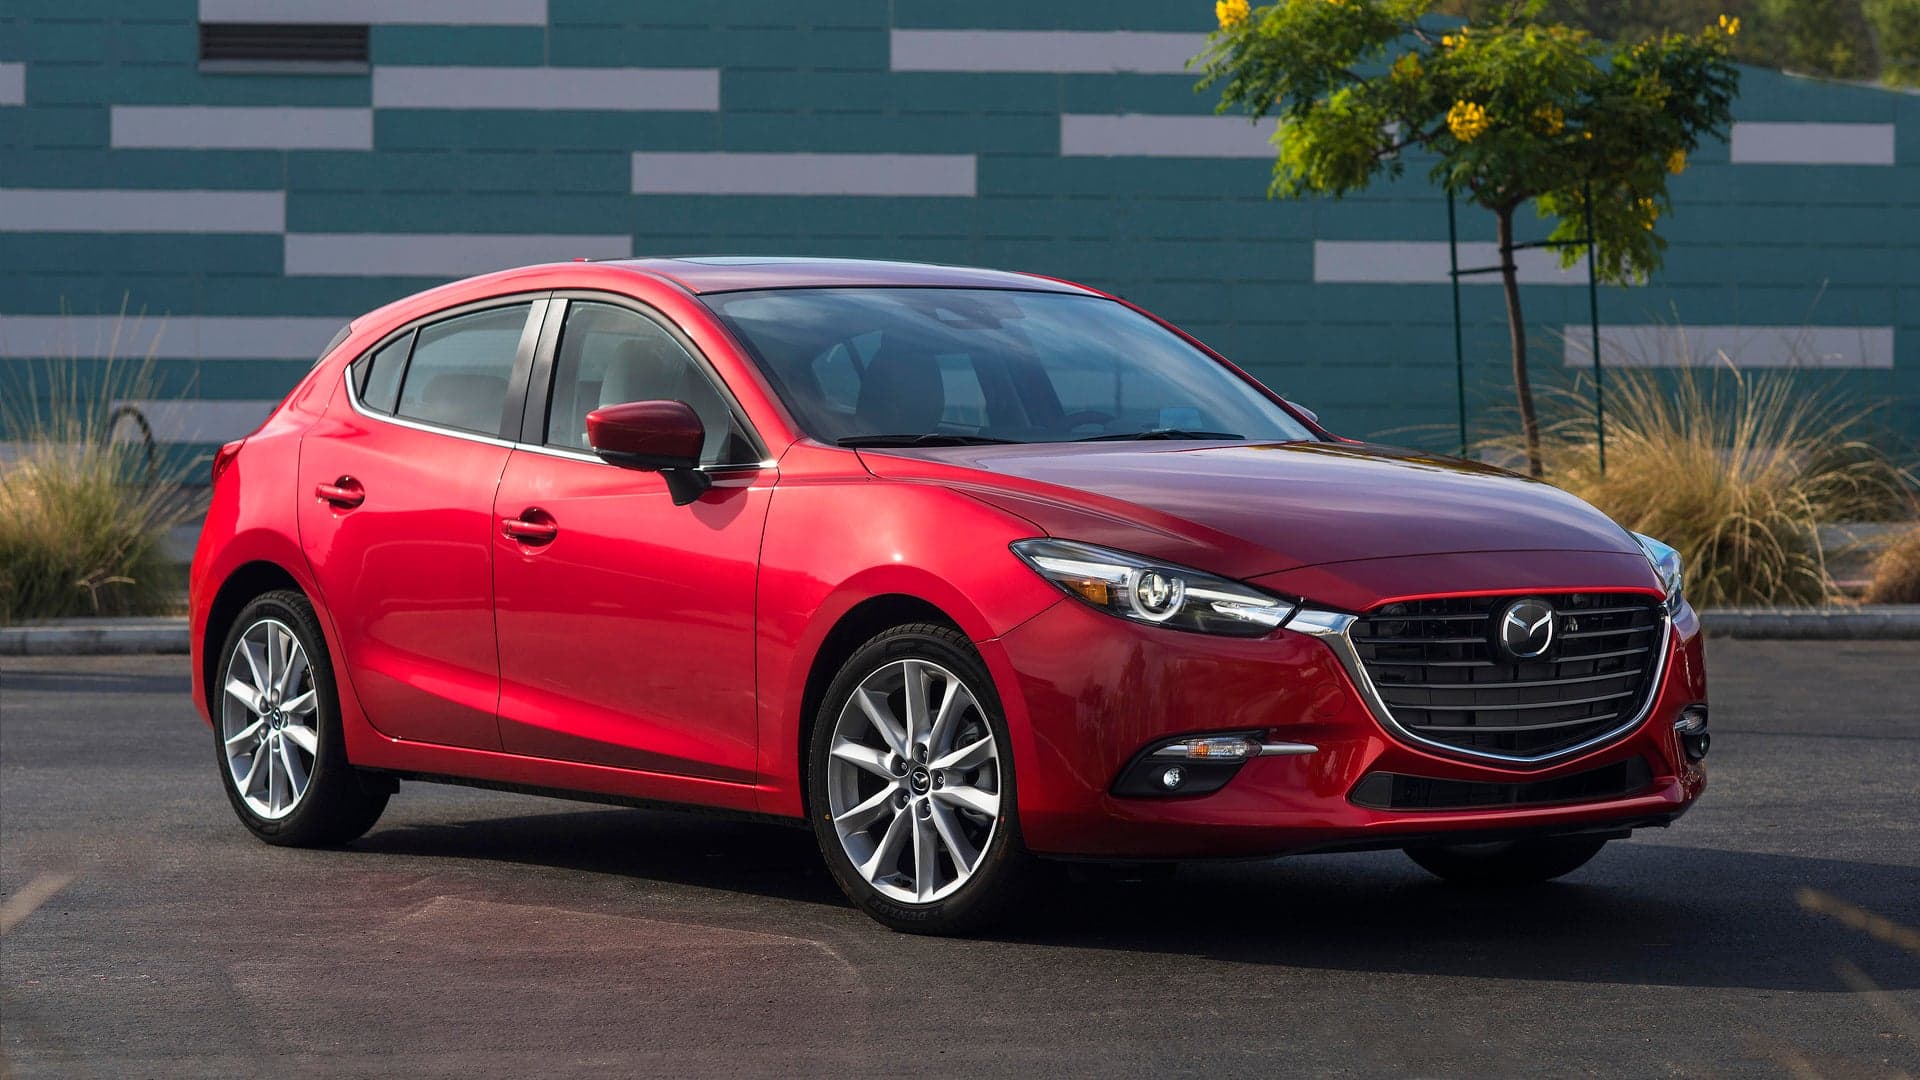 Mazda 3 Named ‘Coolest Car Under $18,000’ by Kelly Blue Book